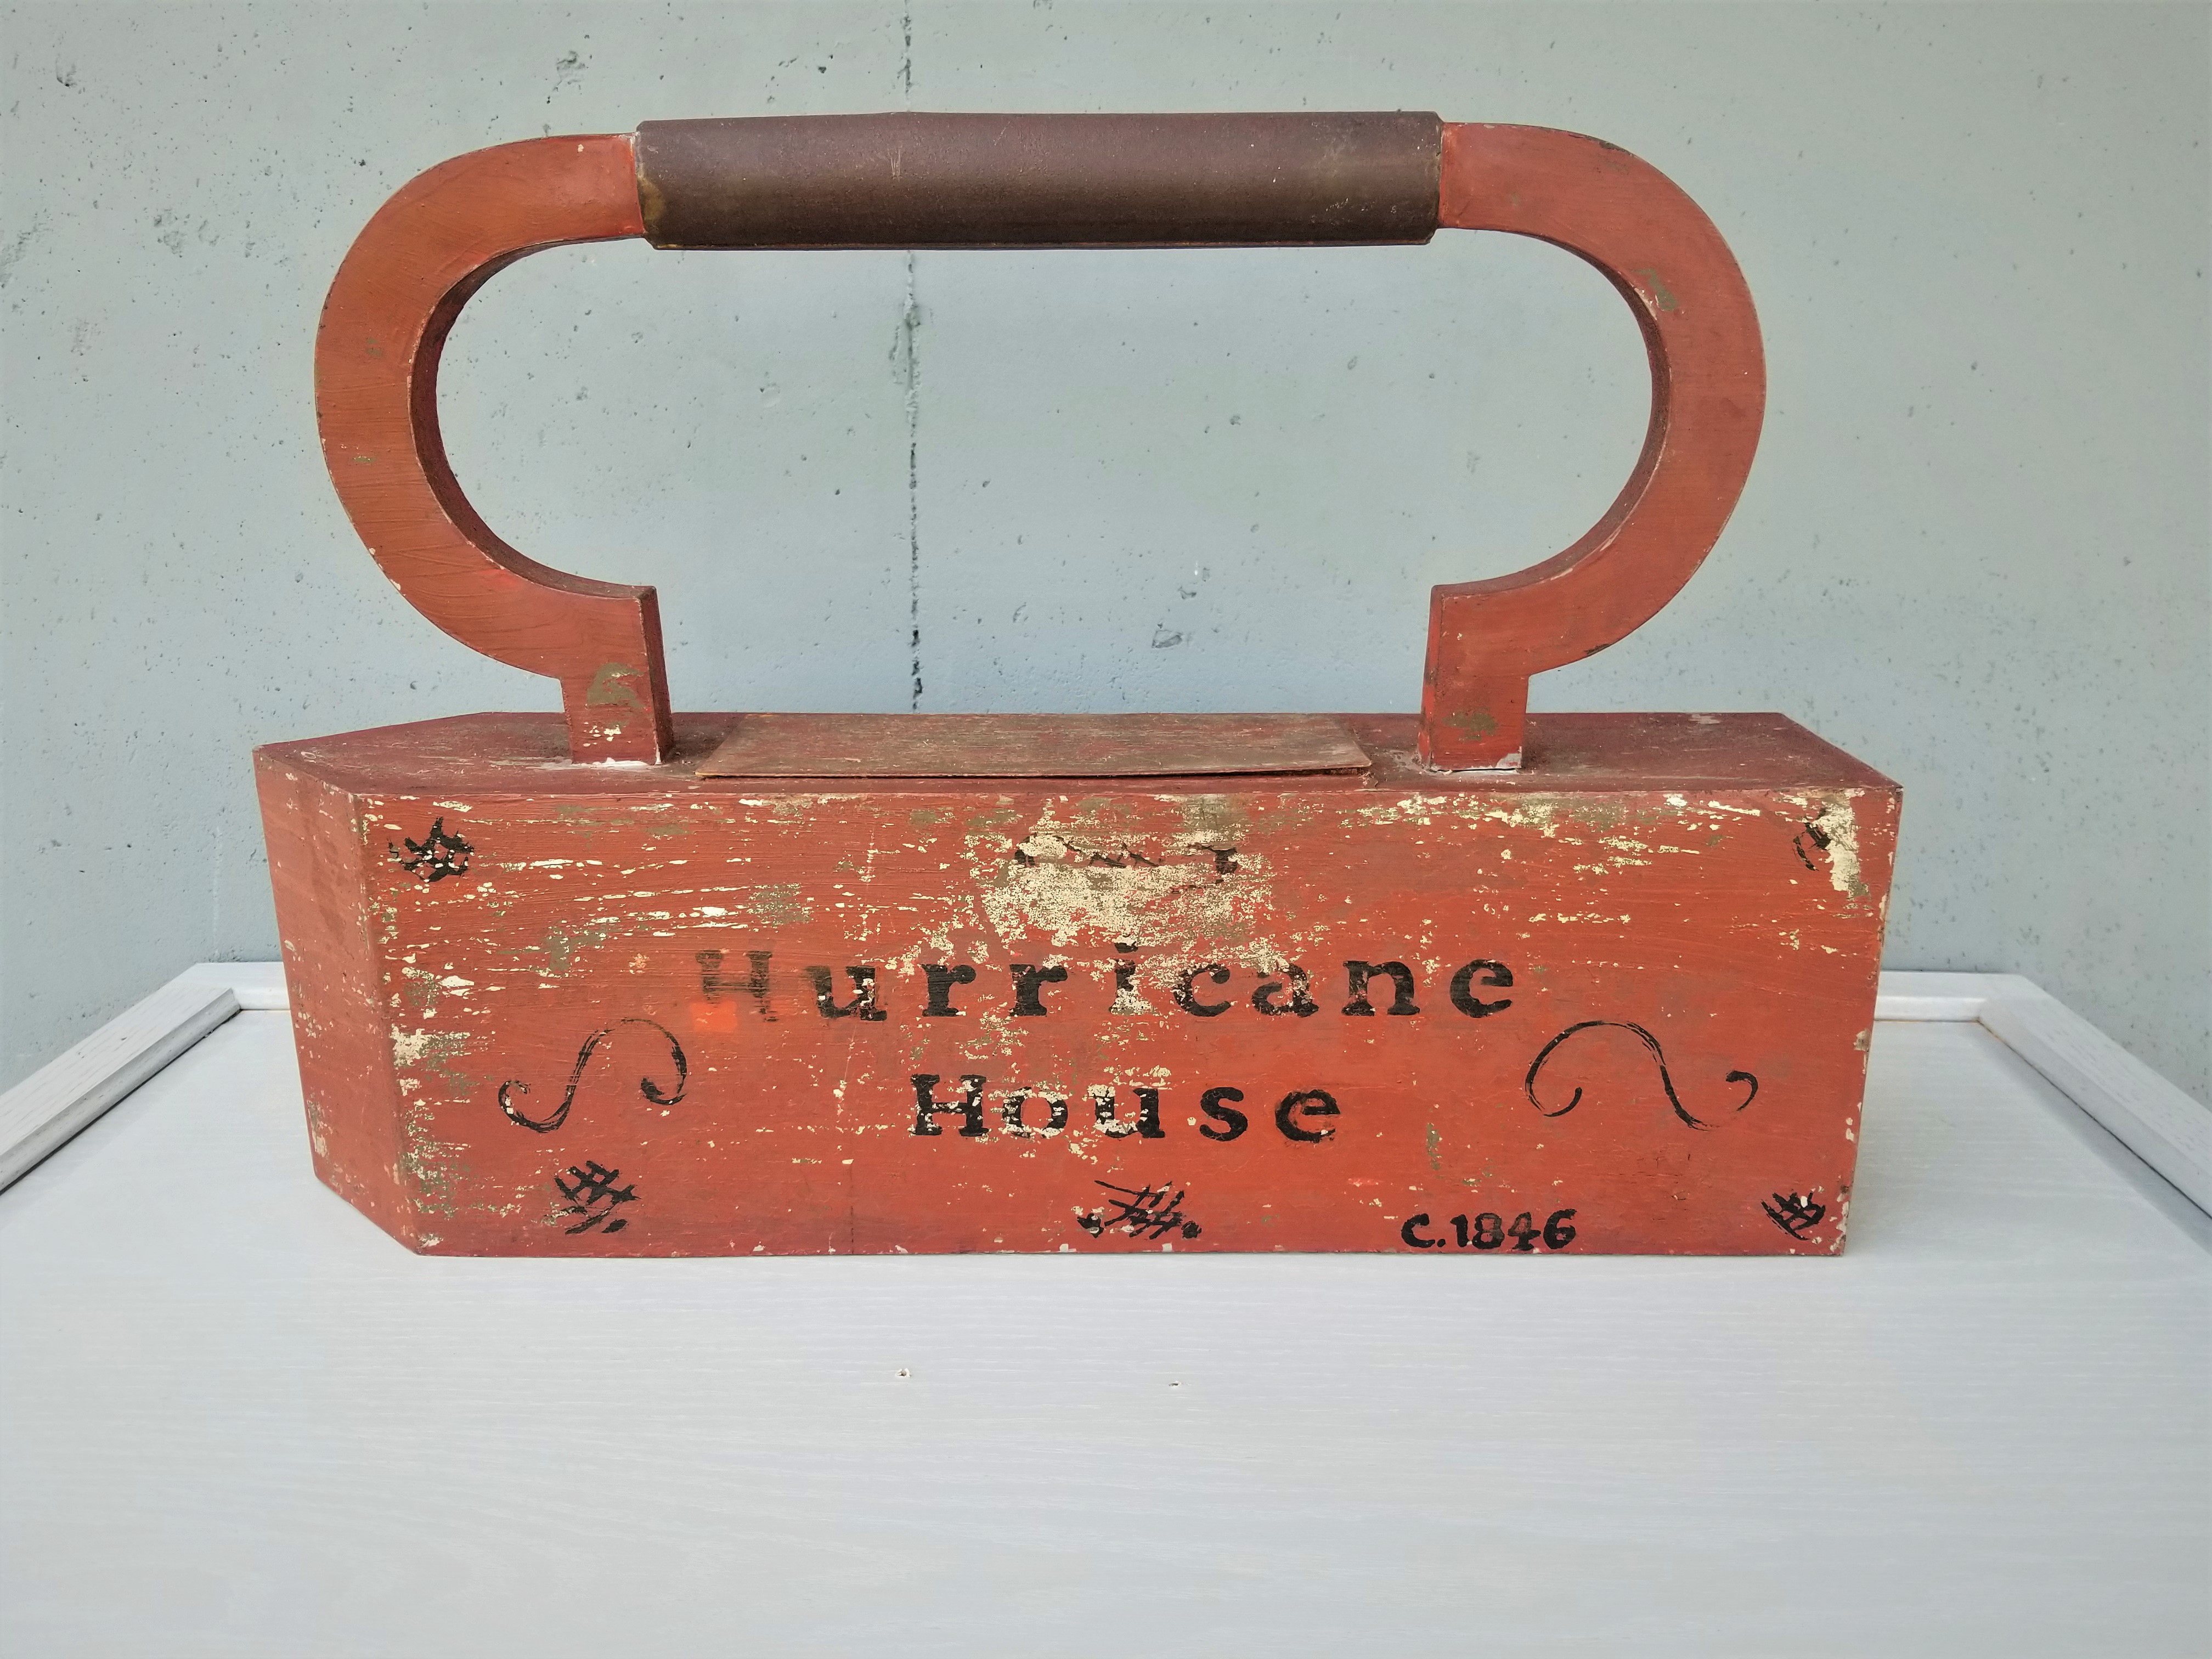 UNUSUAL TRADE SIGN FORM OF AN IRON